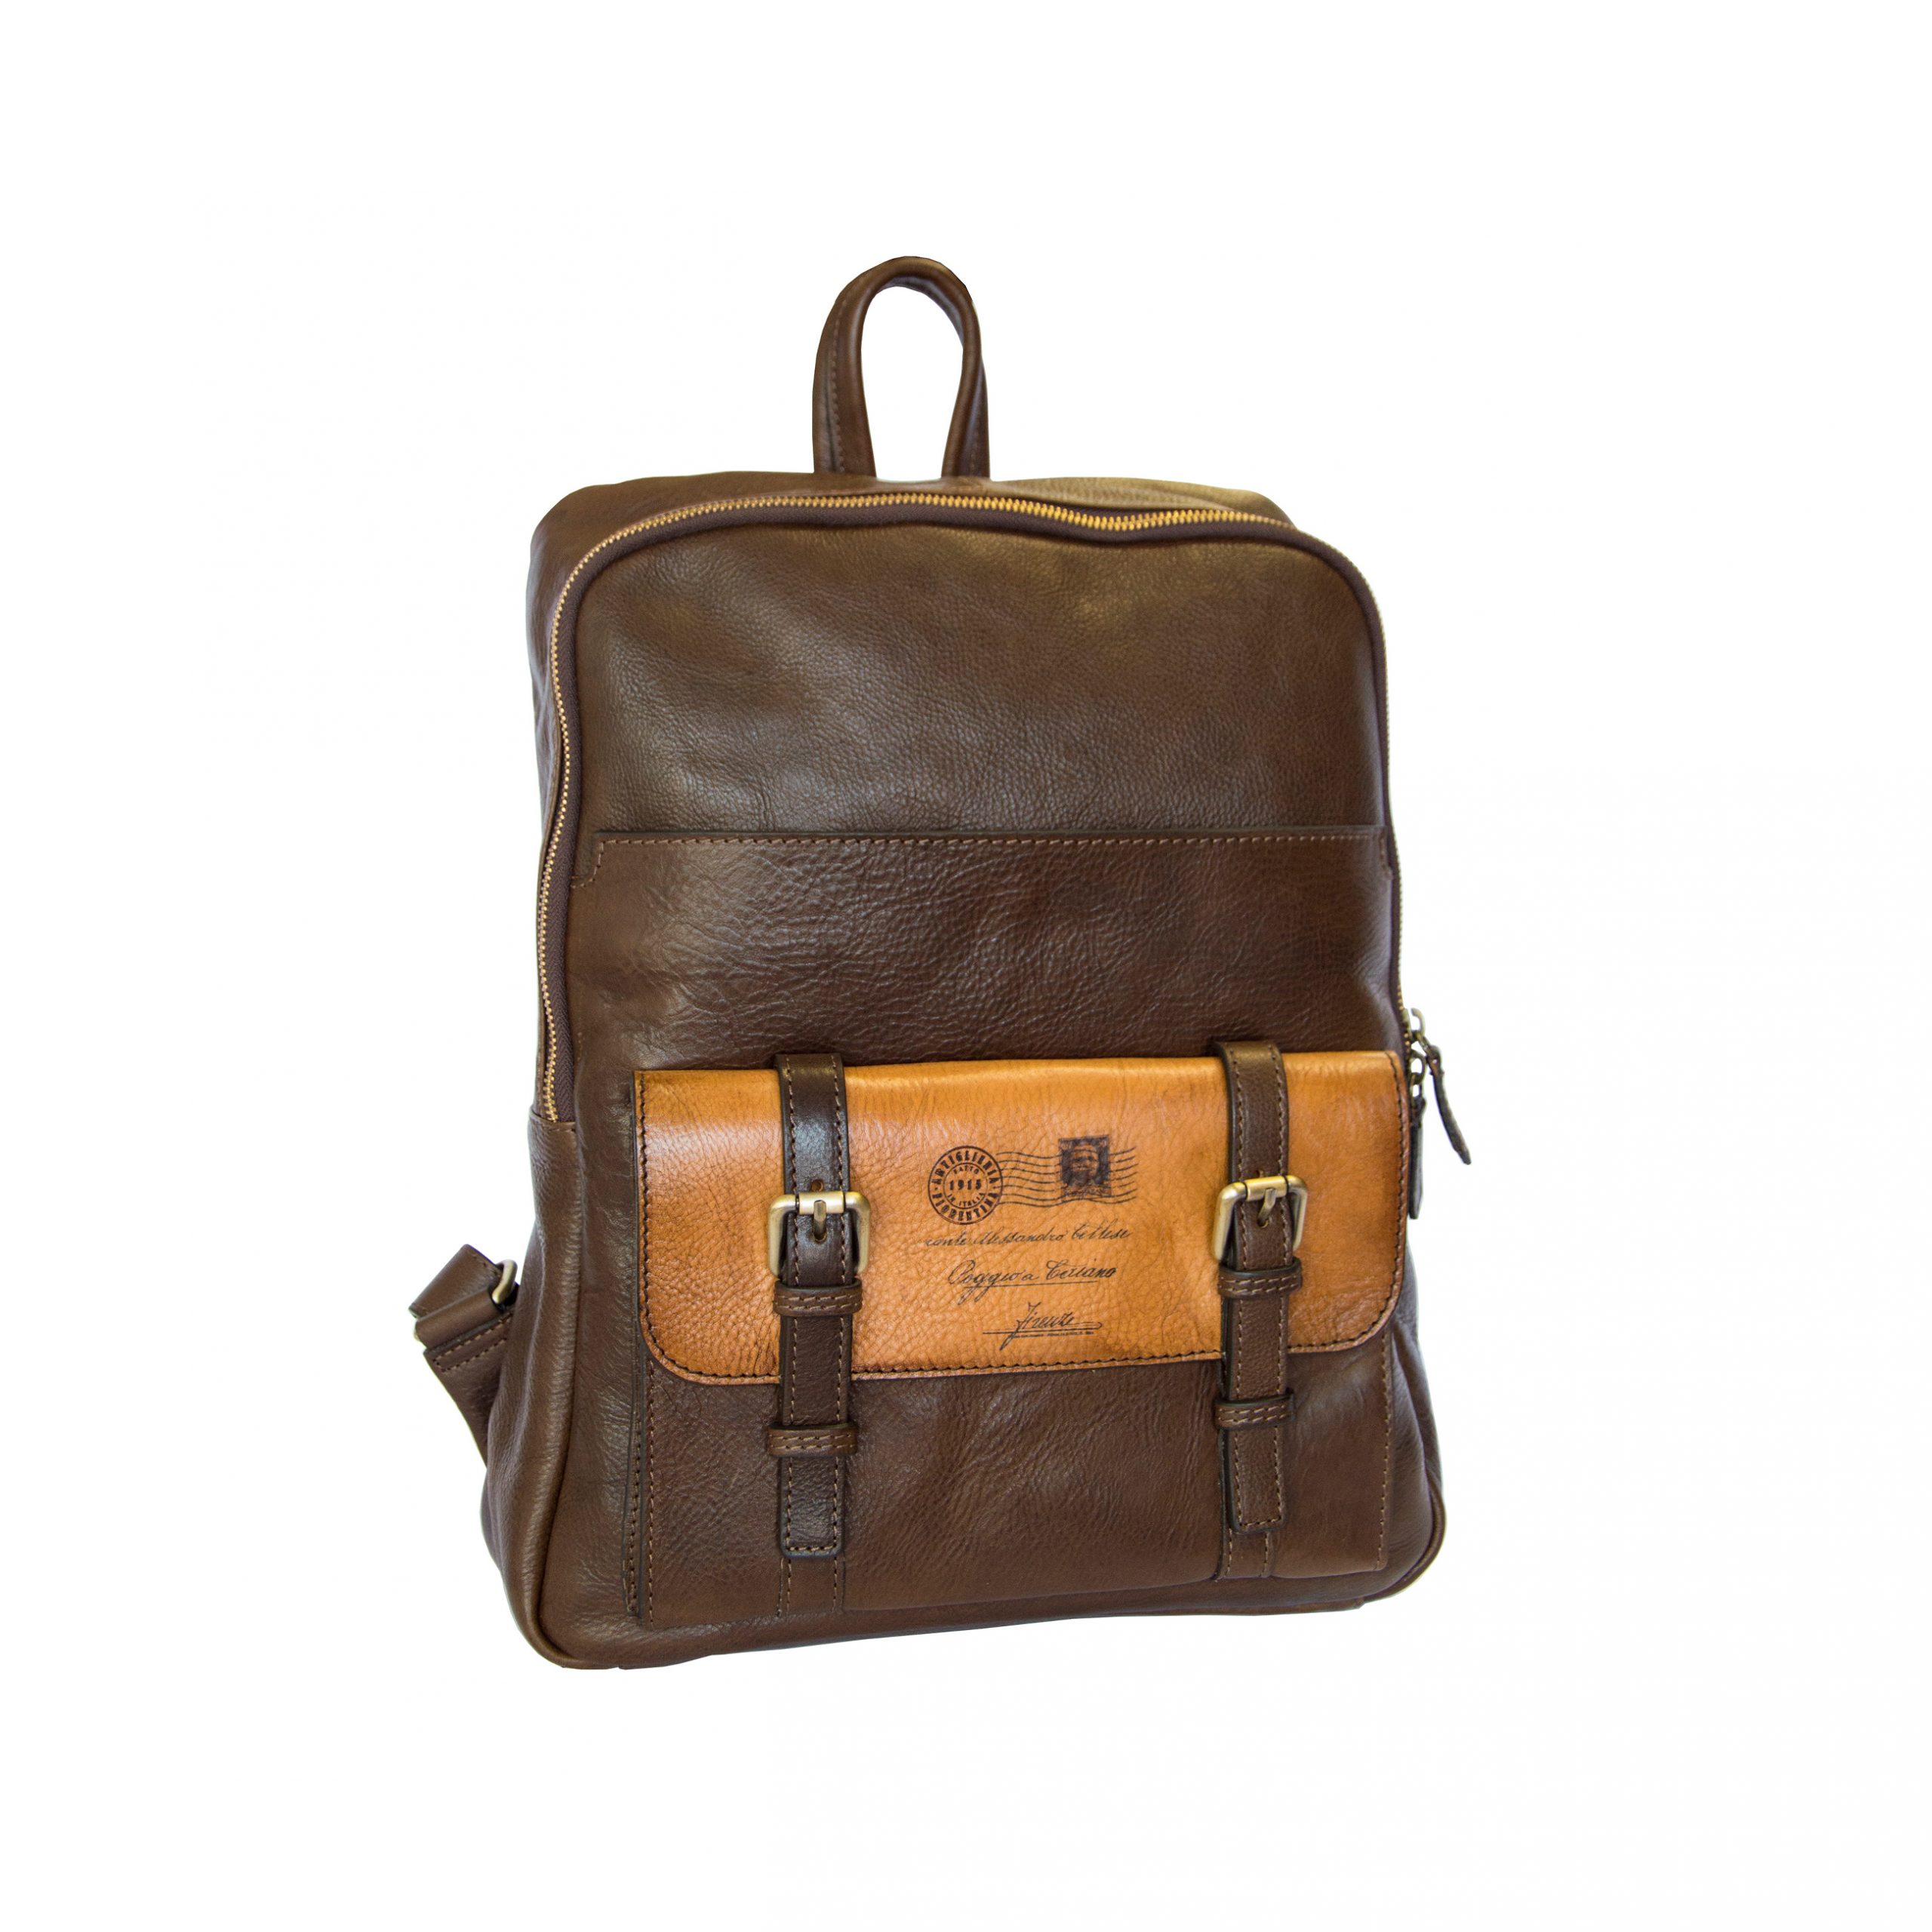 Leather backpack Made with full grain calfskin